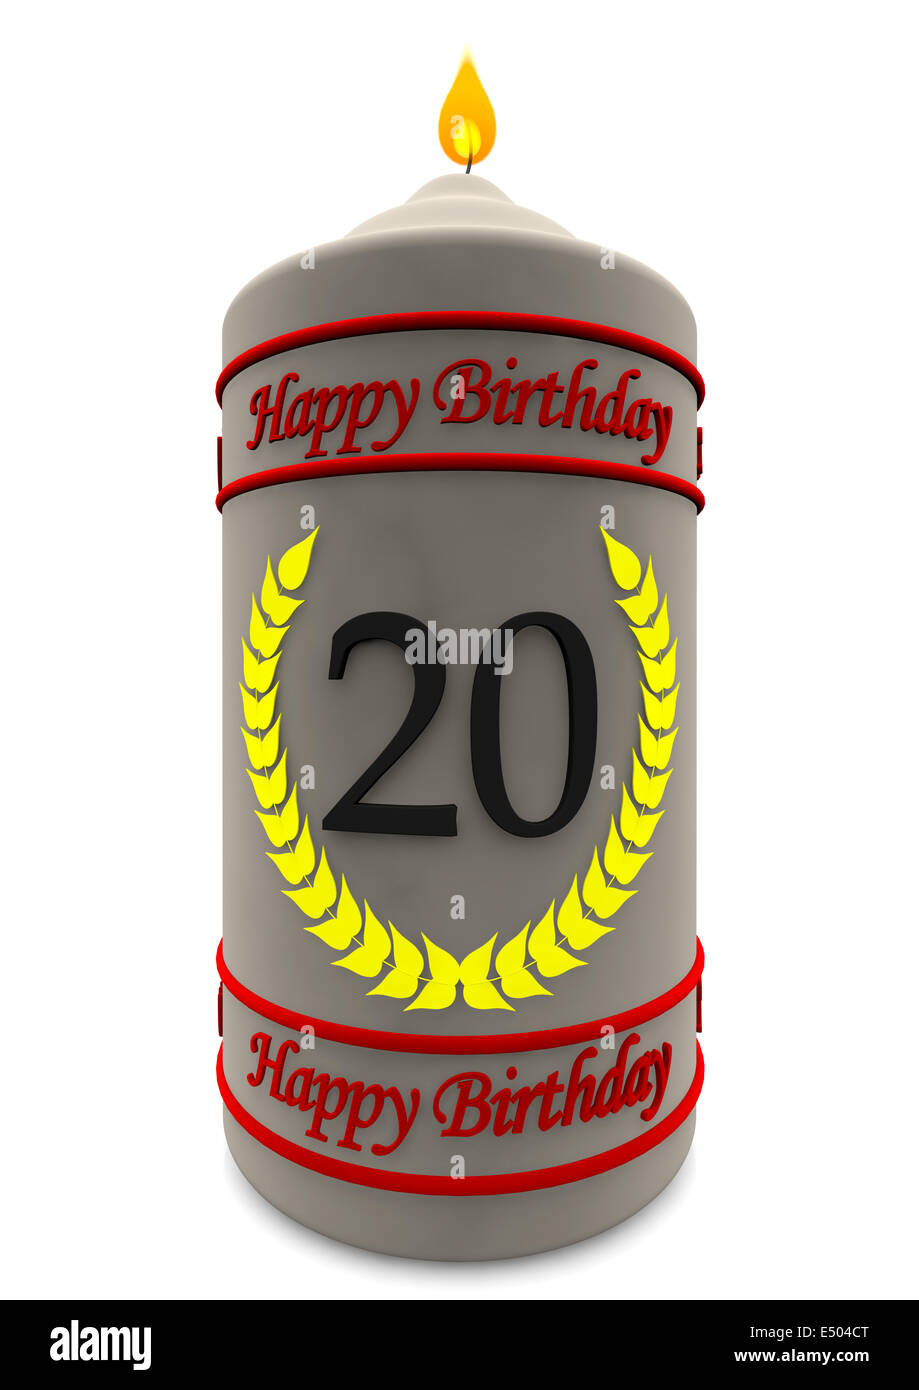 birthday candle for 20th birthday Stock Photo